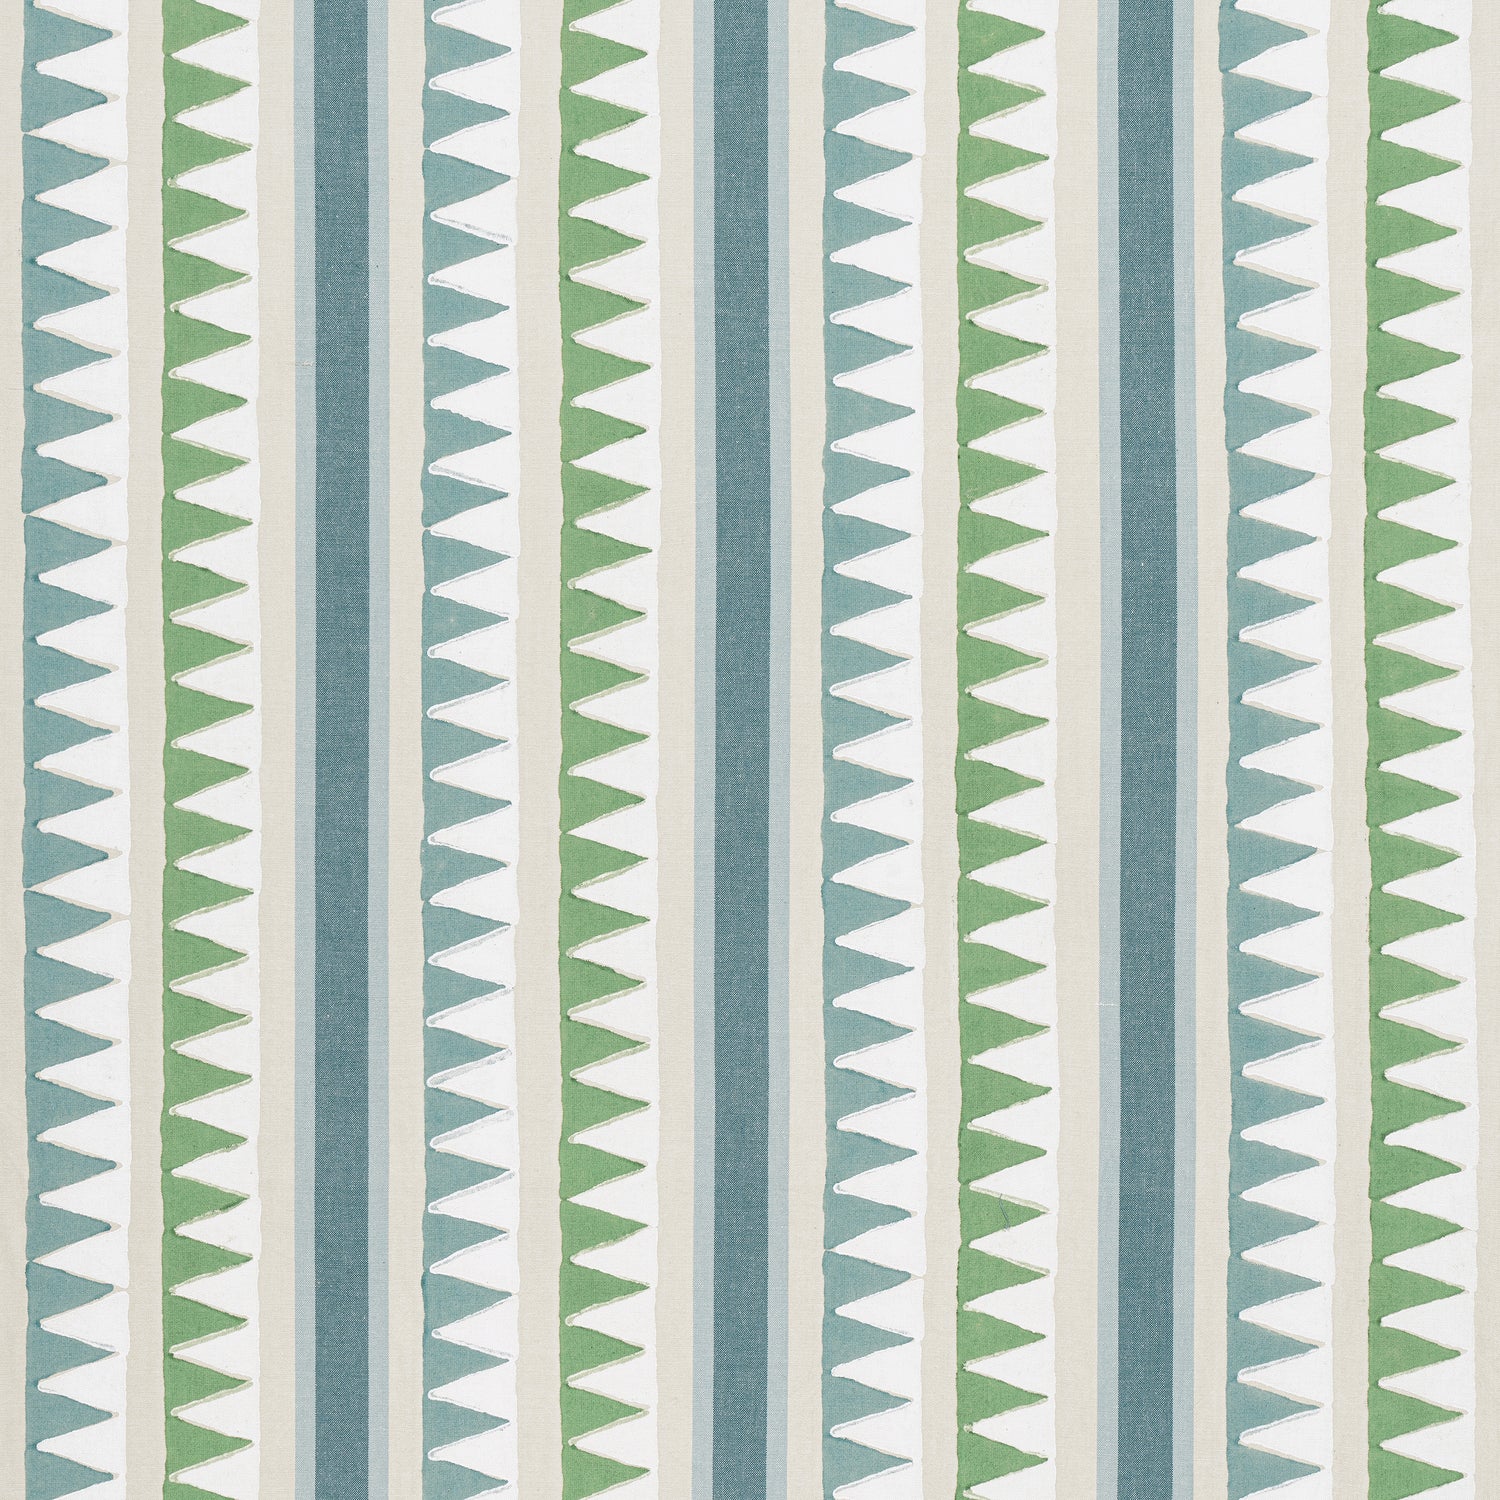 Lomita Stripe fabric in green and blue color - pattern number F916236 - by Thibaut in the Kismet collection